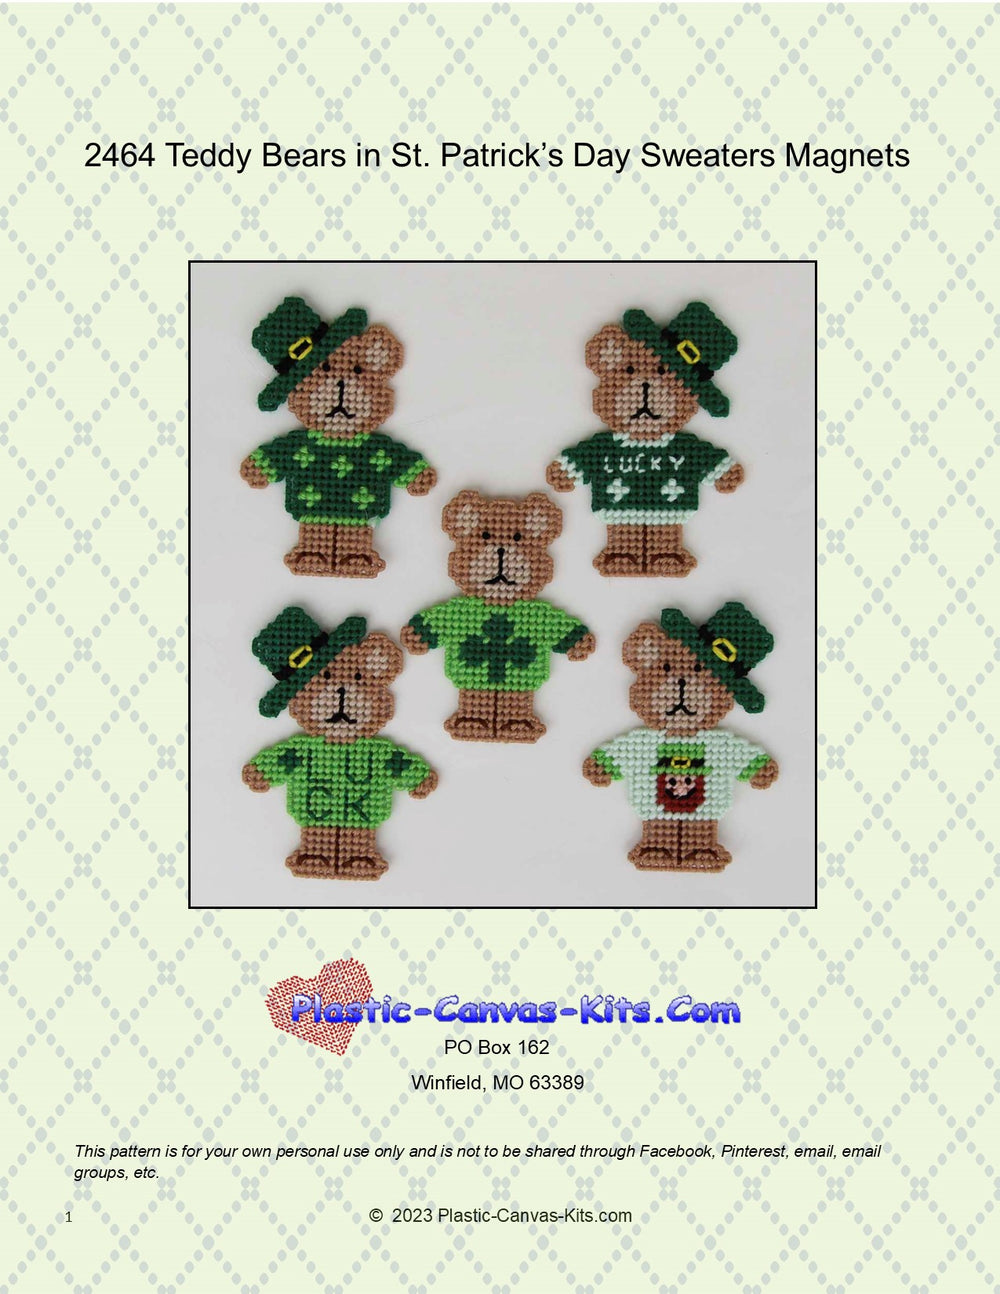 Teddy Bears in St. Patrick's Day Sweaters Magnets